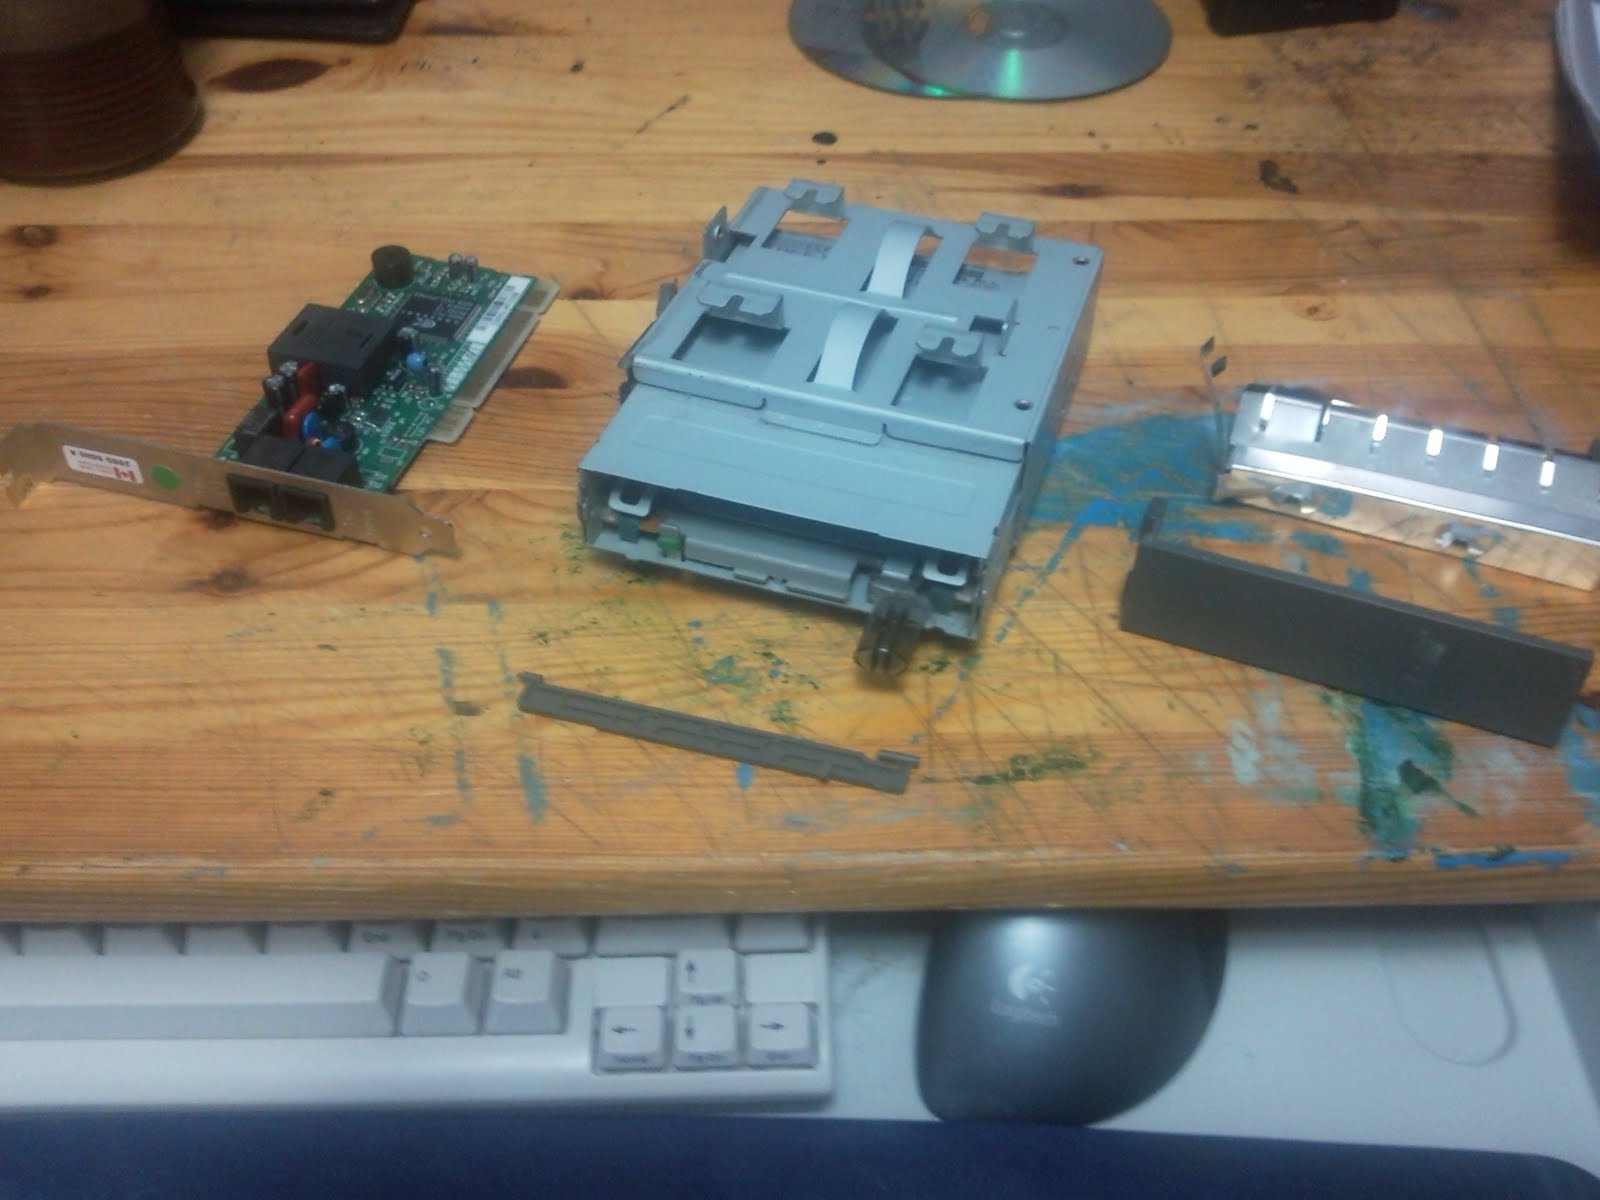 A removed dial-up modem, 3.5 inch floppy drive and a placeholder face-plate